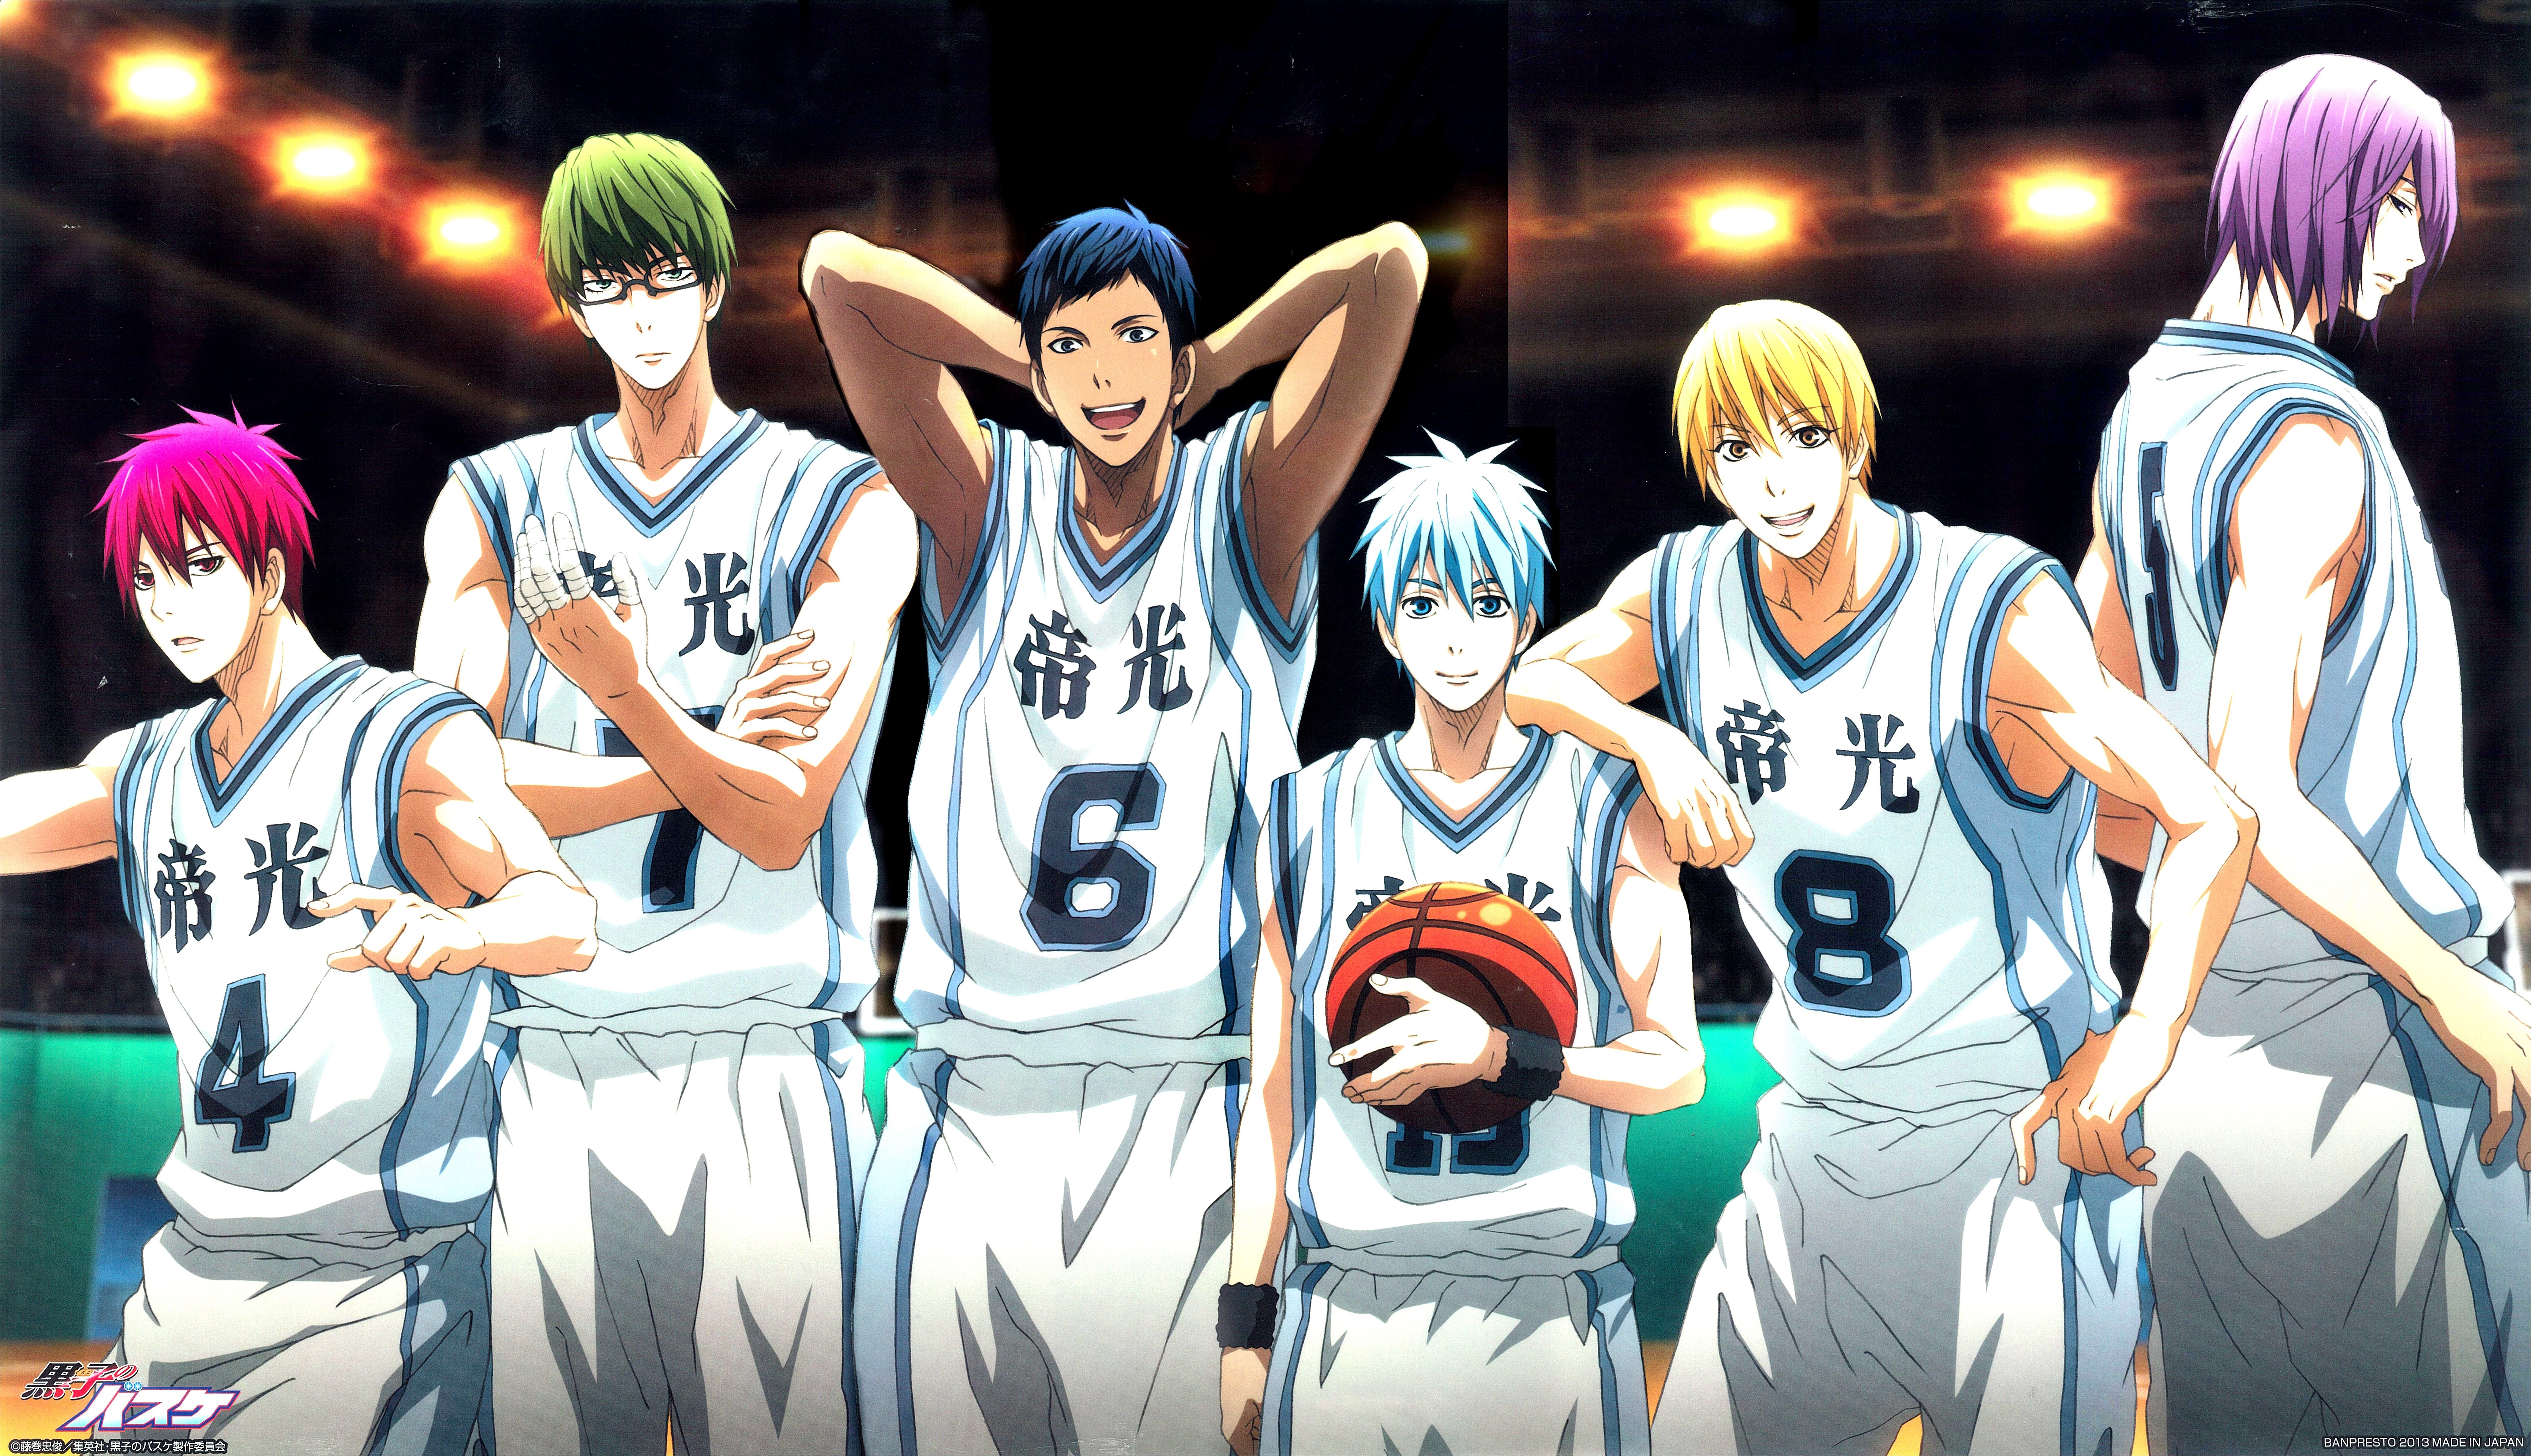 10,000 Anime Fans Voted for the Fictional Schools They Want to Study At haruhichan.com Teiko Junior High Kuroko's Basketball